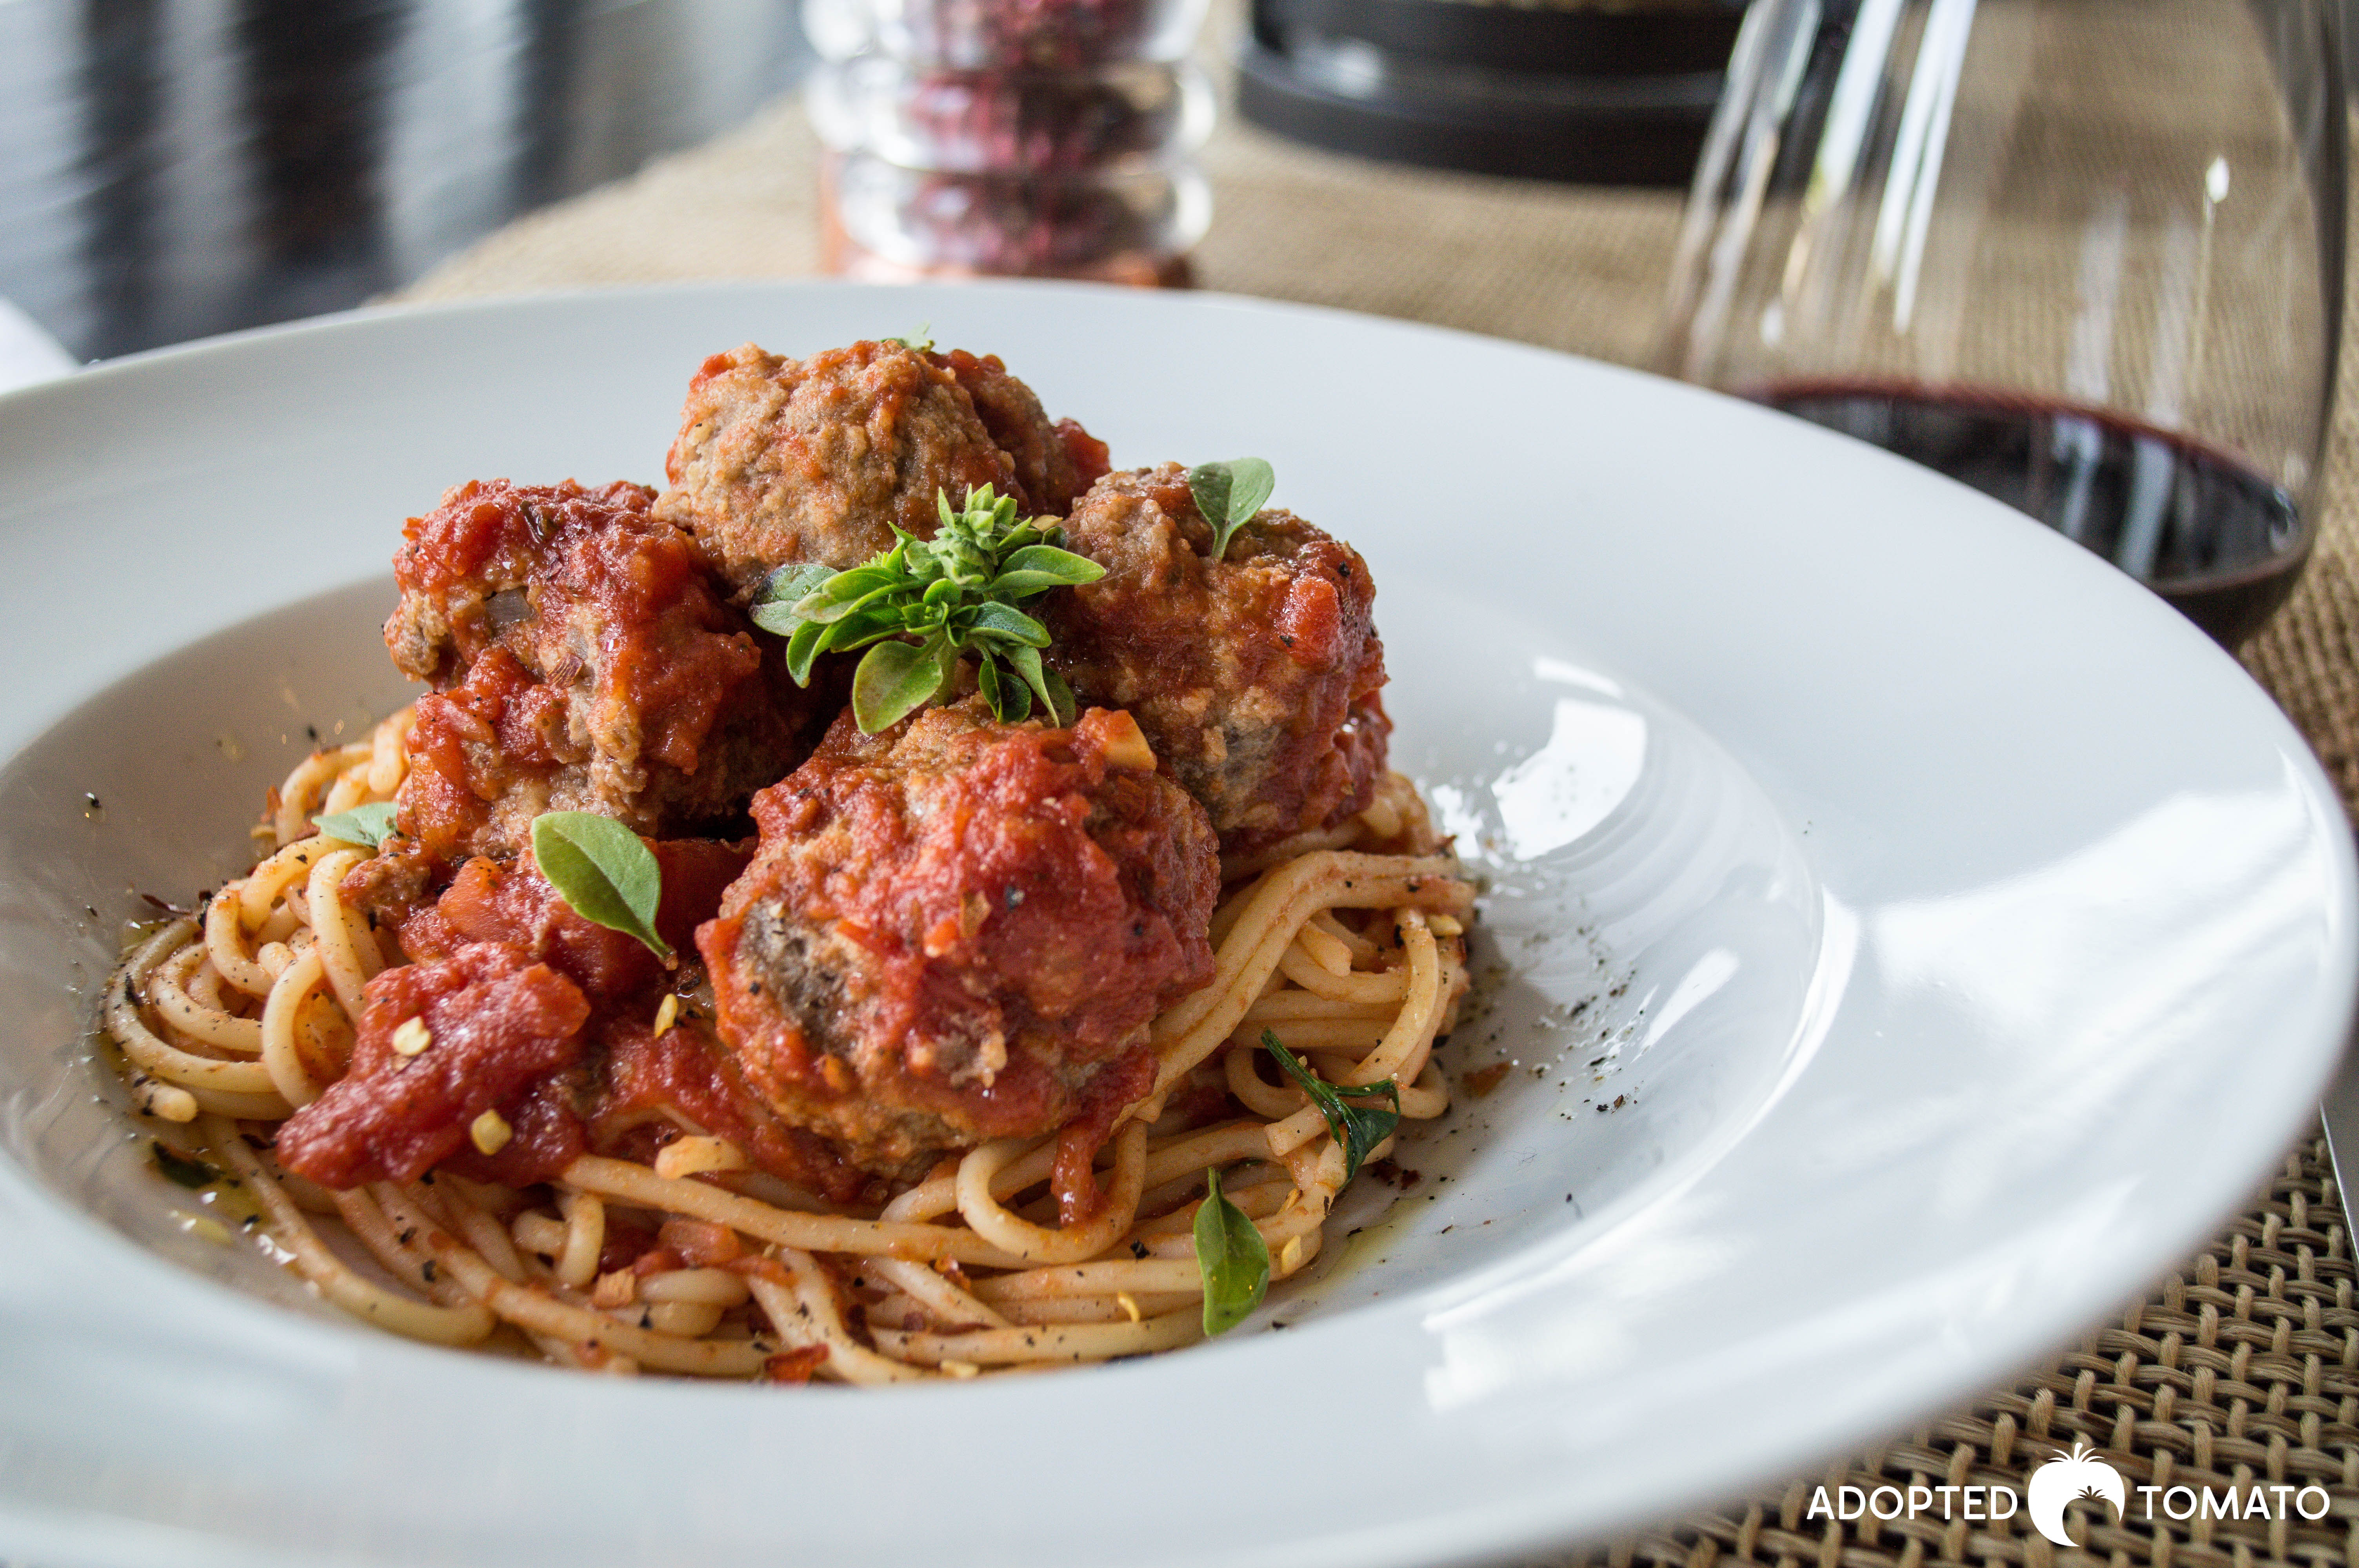 Classic Spaghetti and Meatballs with Fresh Tomatoes and Herbs